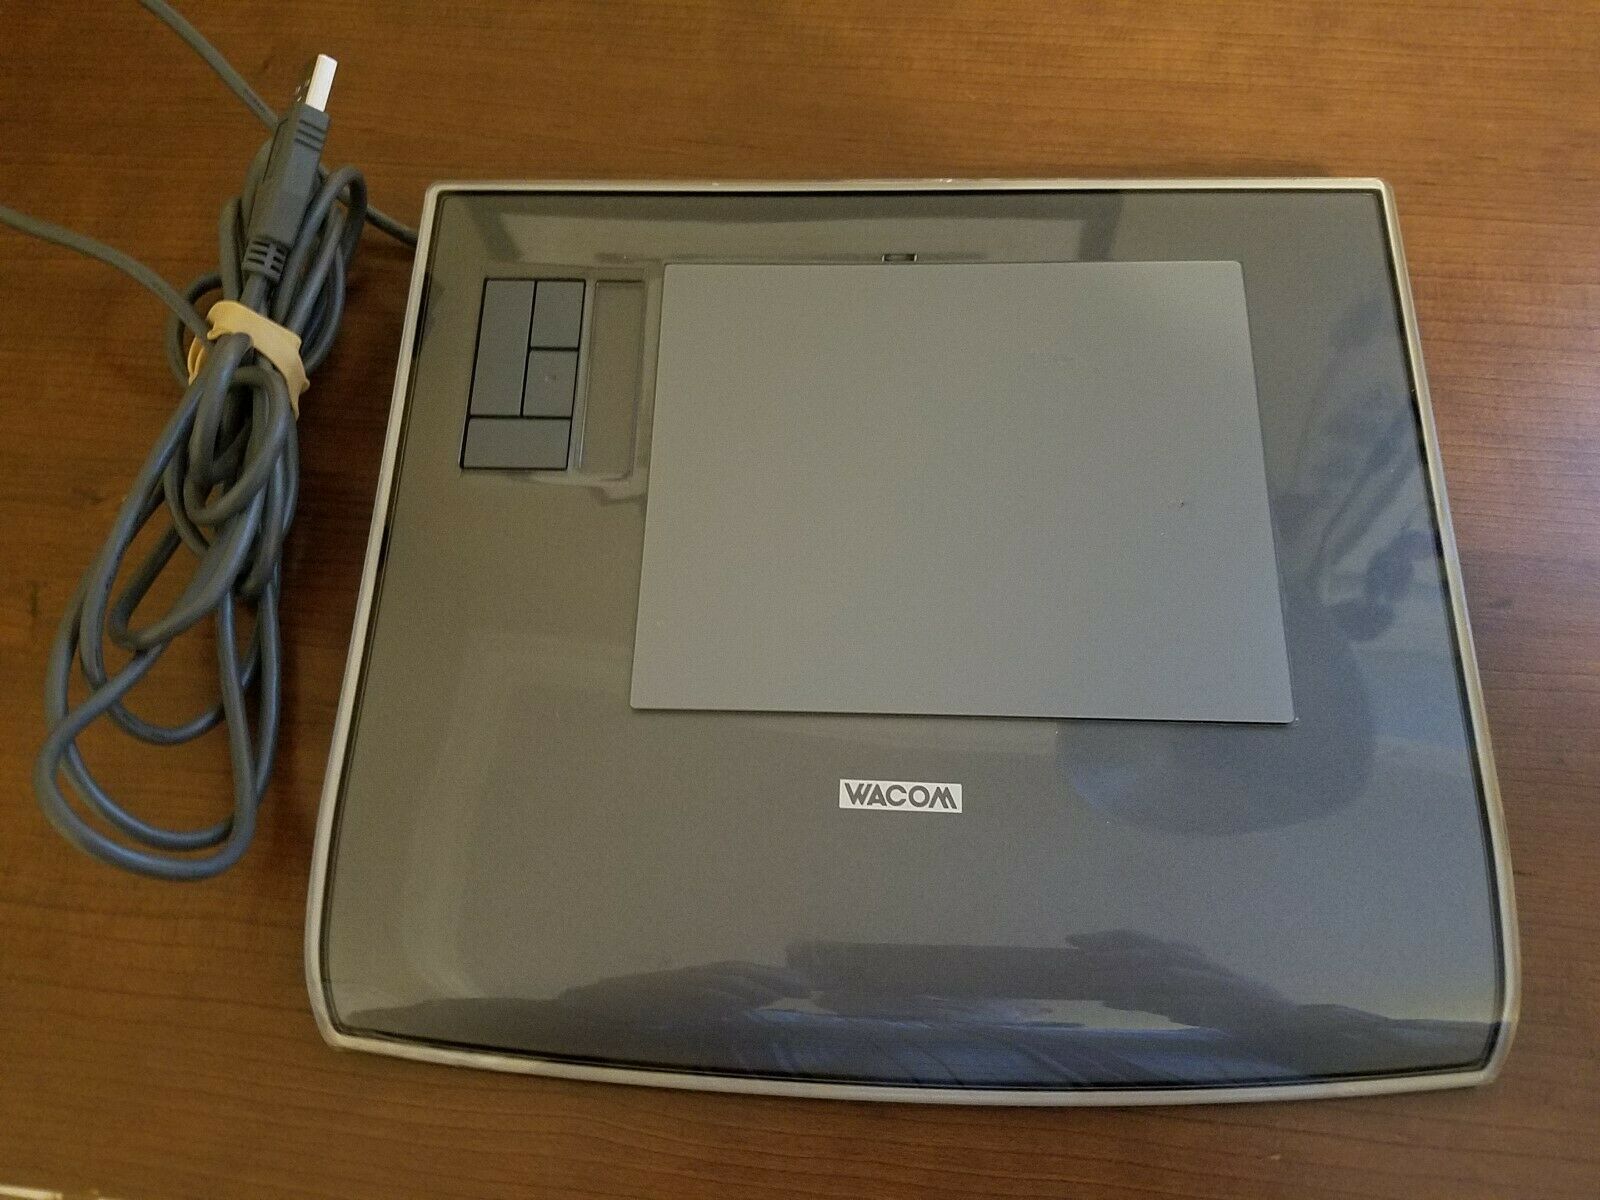 Wacom Intuos 3 PTZ-430 Graphic Drawing Tablet